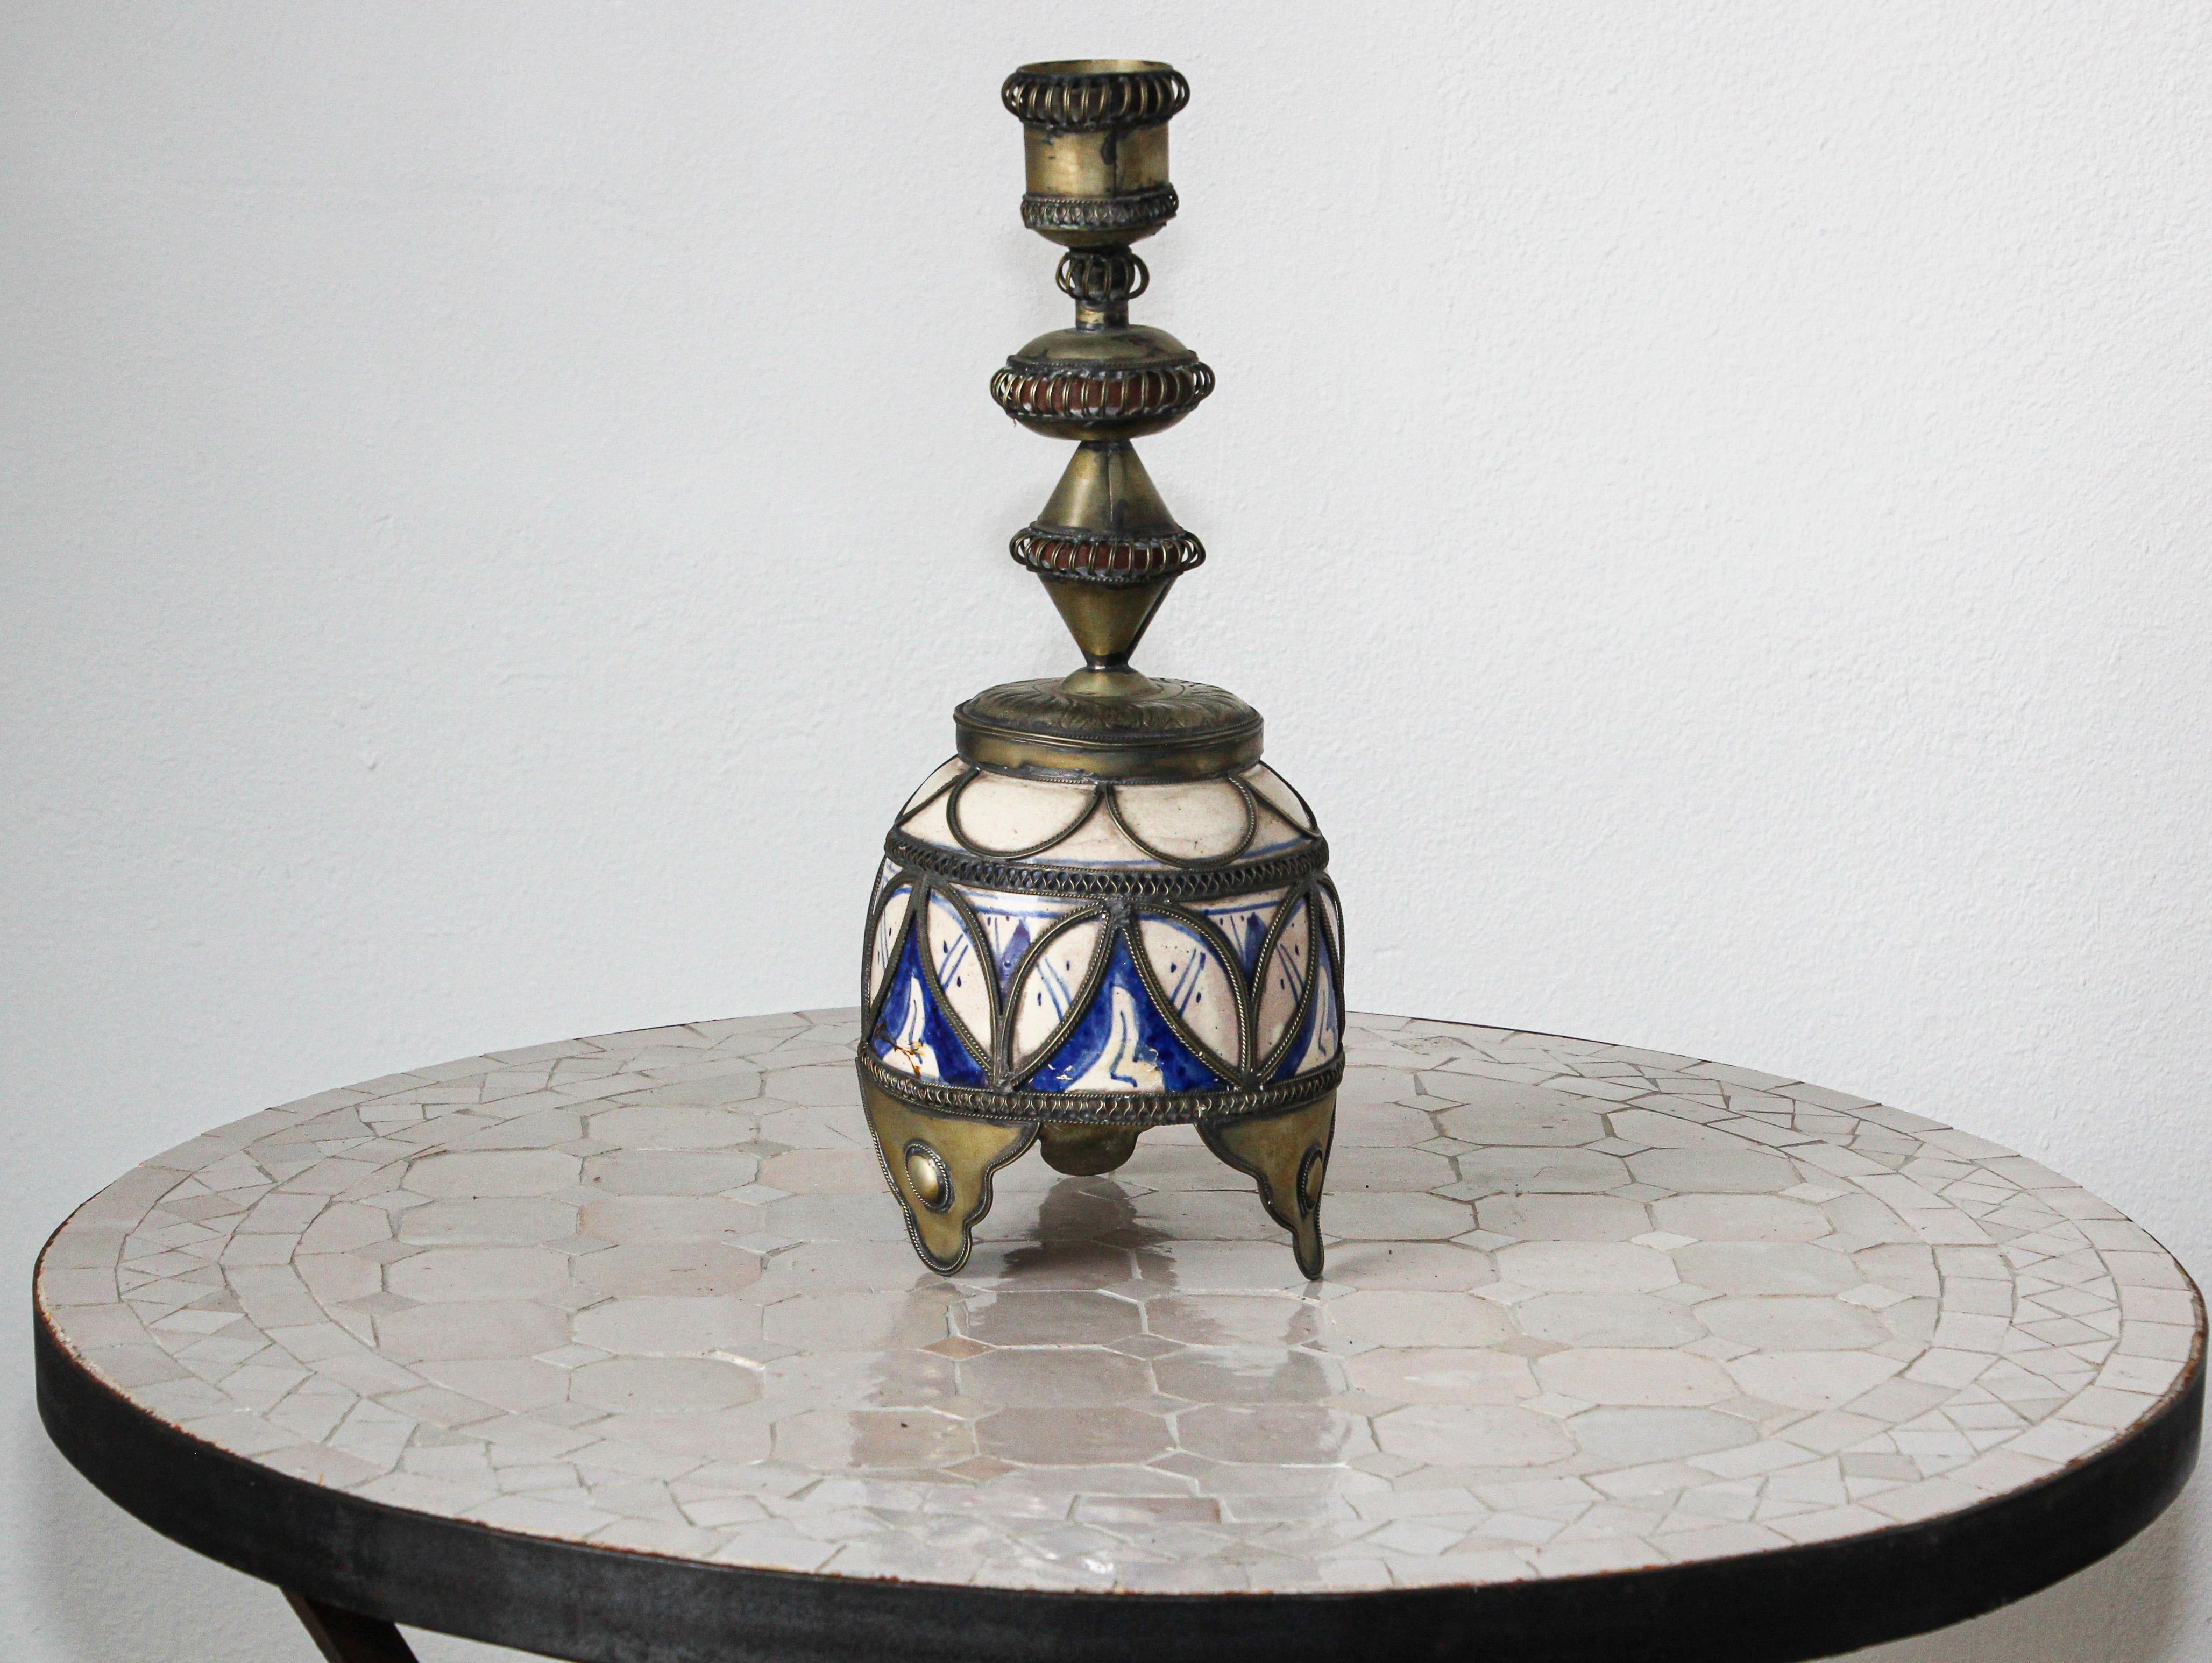 Fabulous handcrafted antique Moroccan blue and white footed ceramic candle holder in Moorish style.
 Adorned with fine filigree silver nickel work.
Candlestick with white and blue color of the ceramic is renowned as bleu de Fez.
Handcrafted in